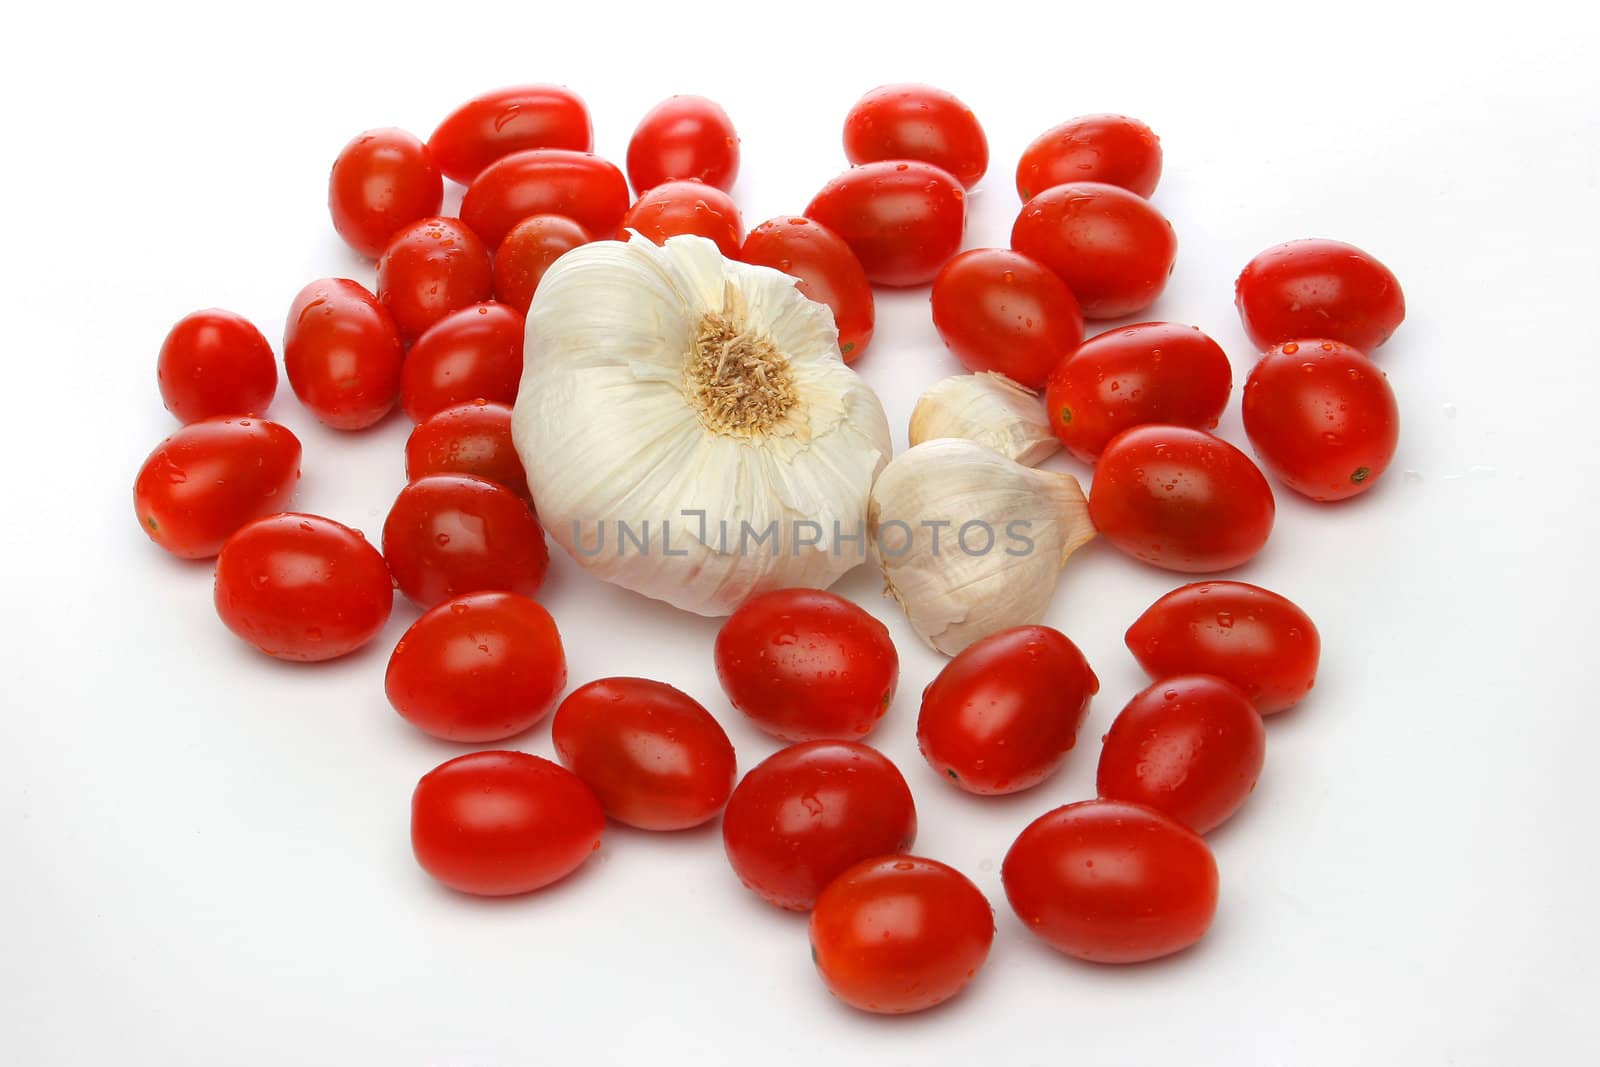 Garlic surrounded by cherry tomatoes by Erdosain